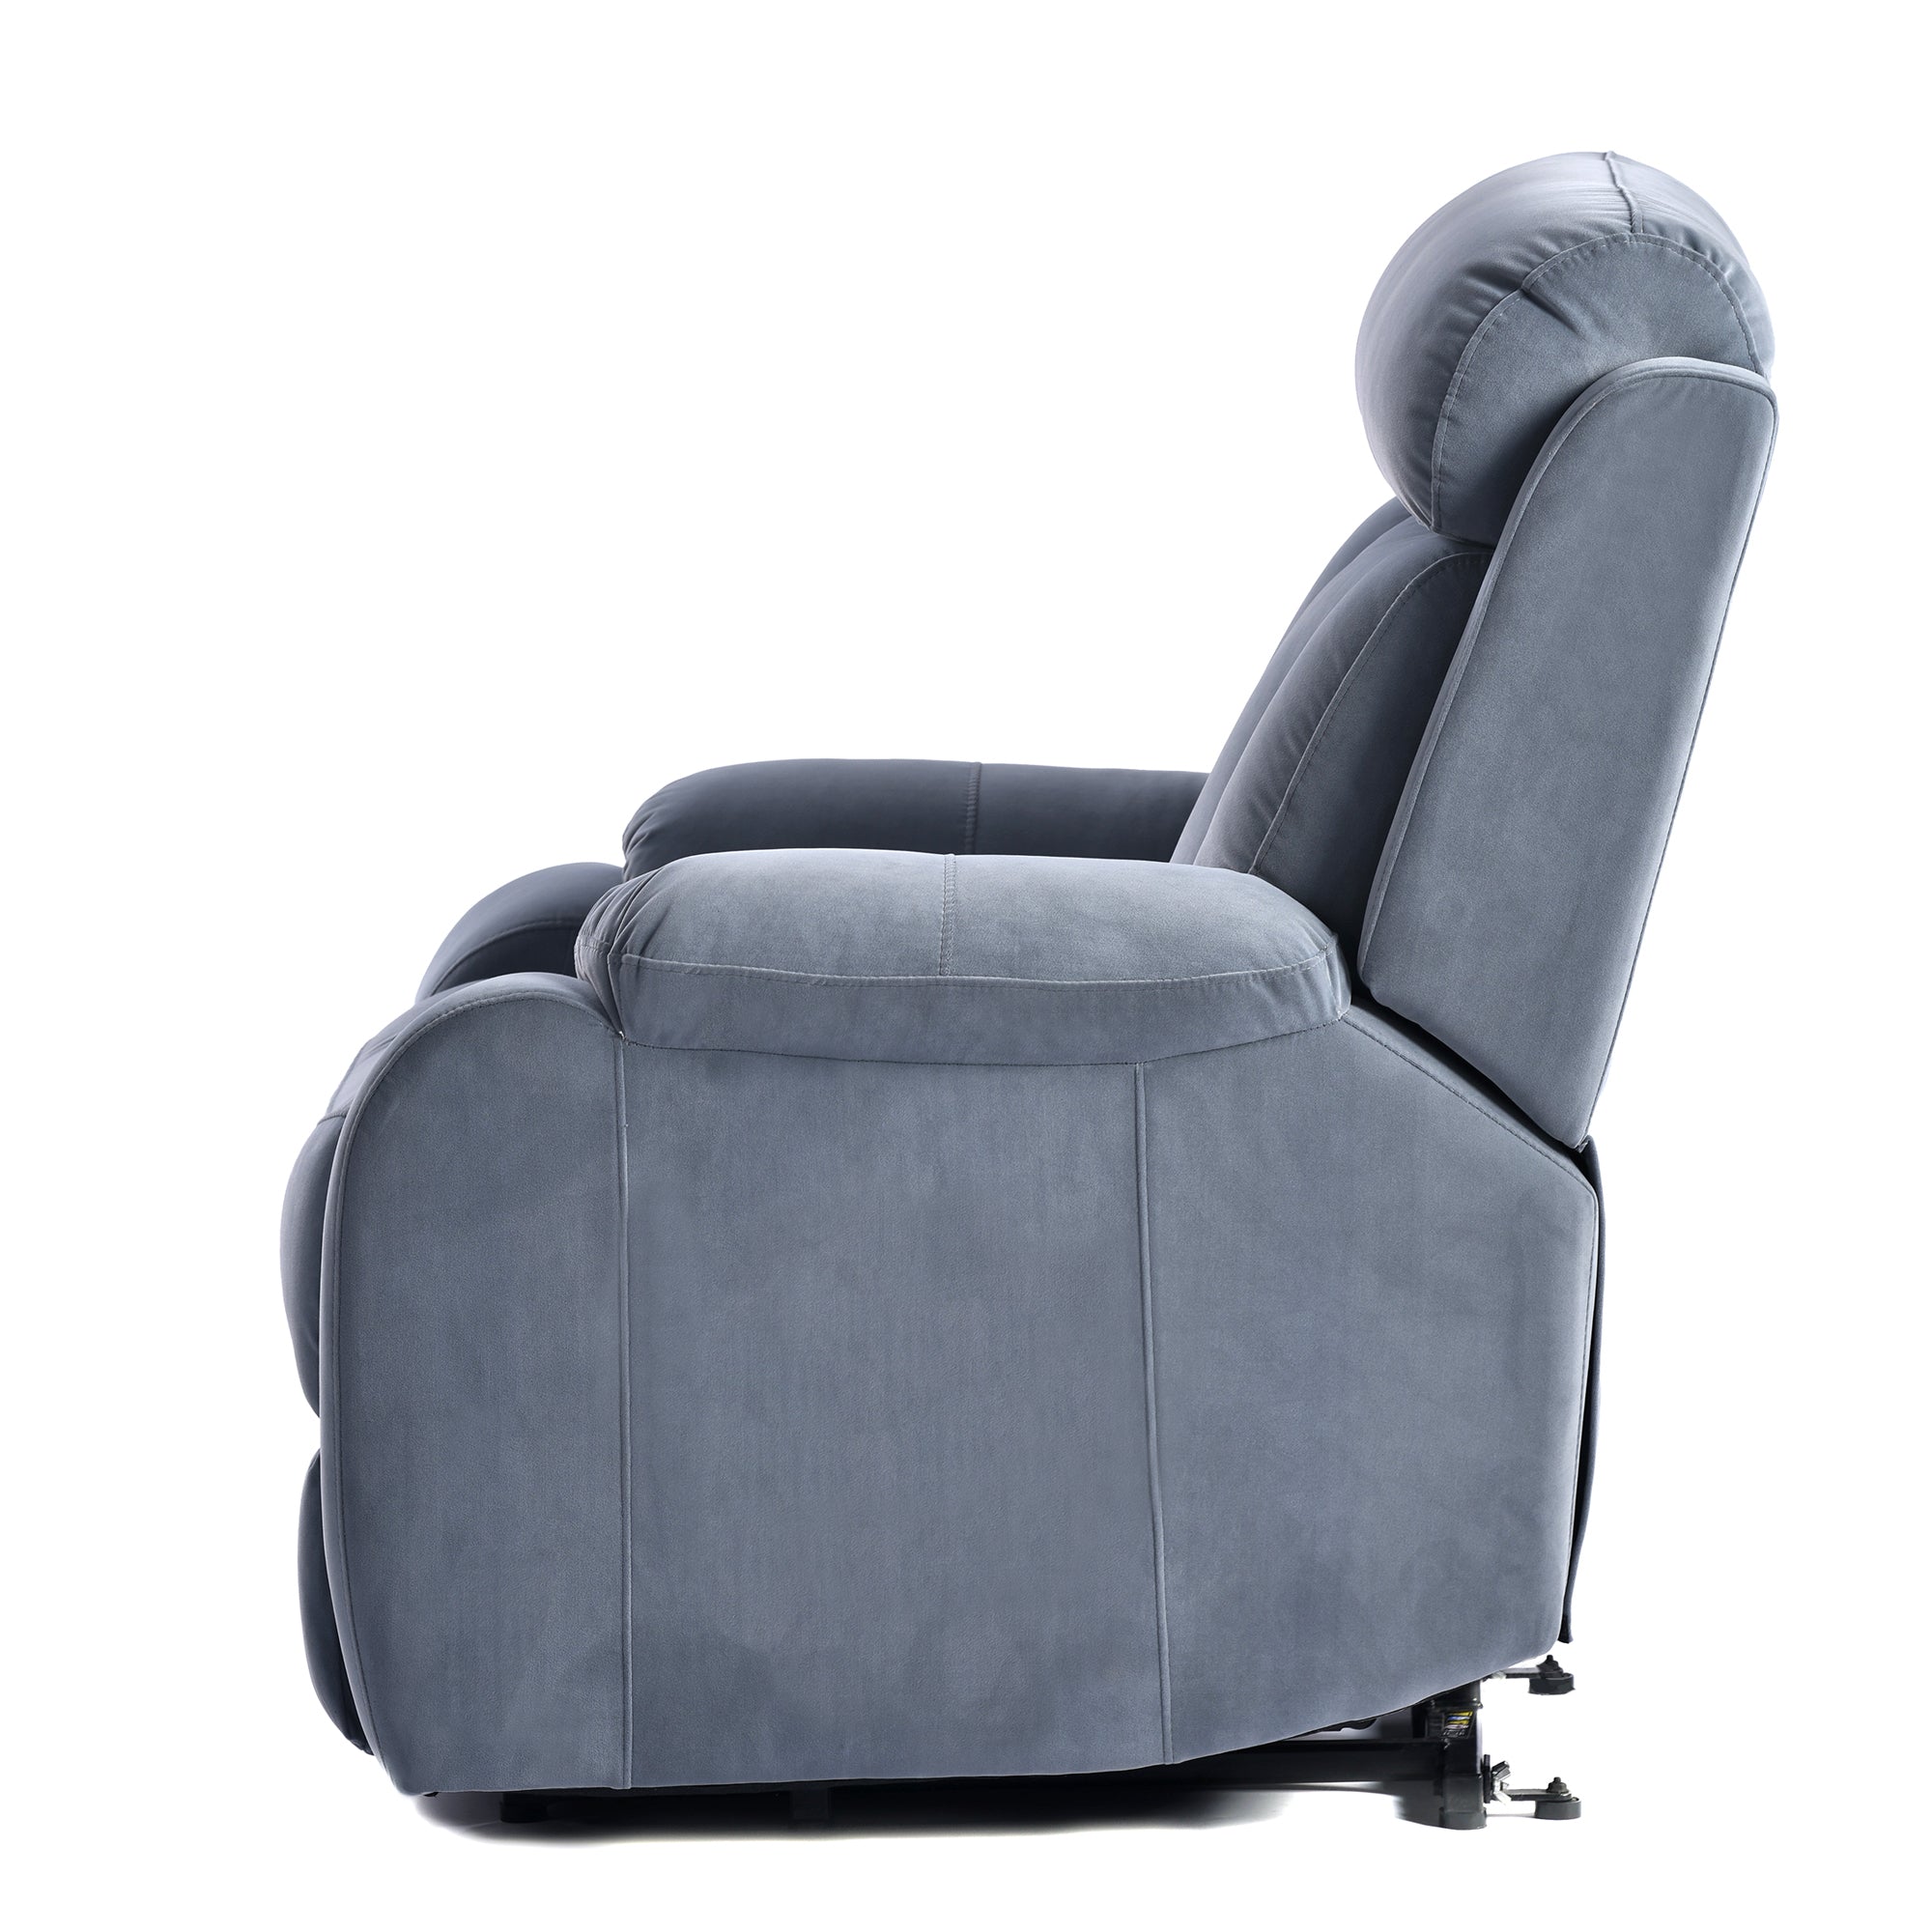 Australia Cashmere Lift Chair Recliner, side view seated